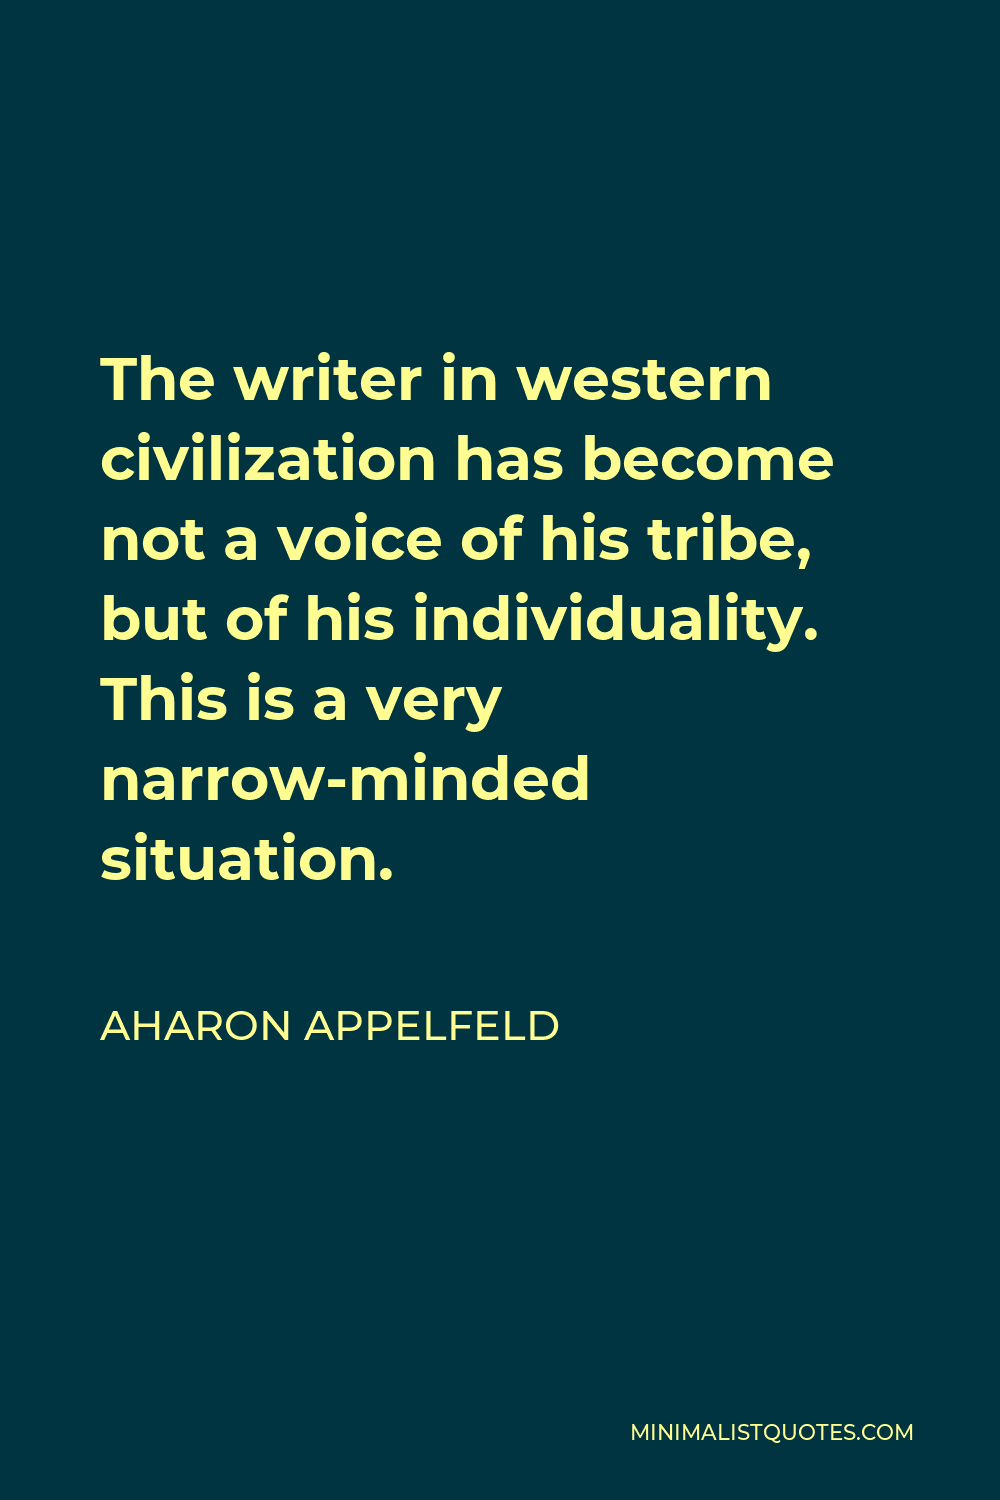 Aharon Appelfeld Quote - The writer in western civilization has become not a voice of his tribe, but of his individuality. This is a very narrow-minded situation.